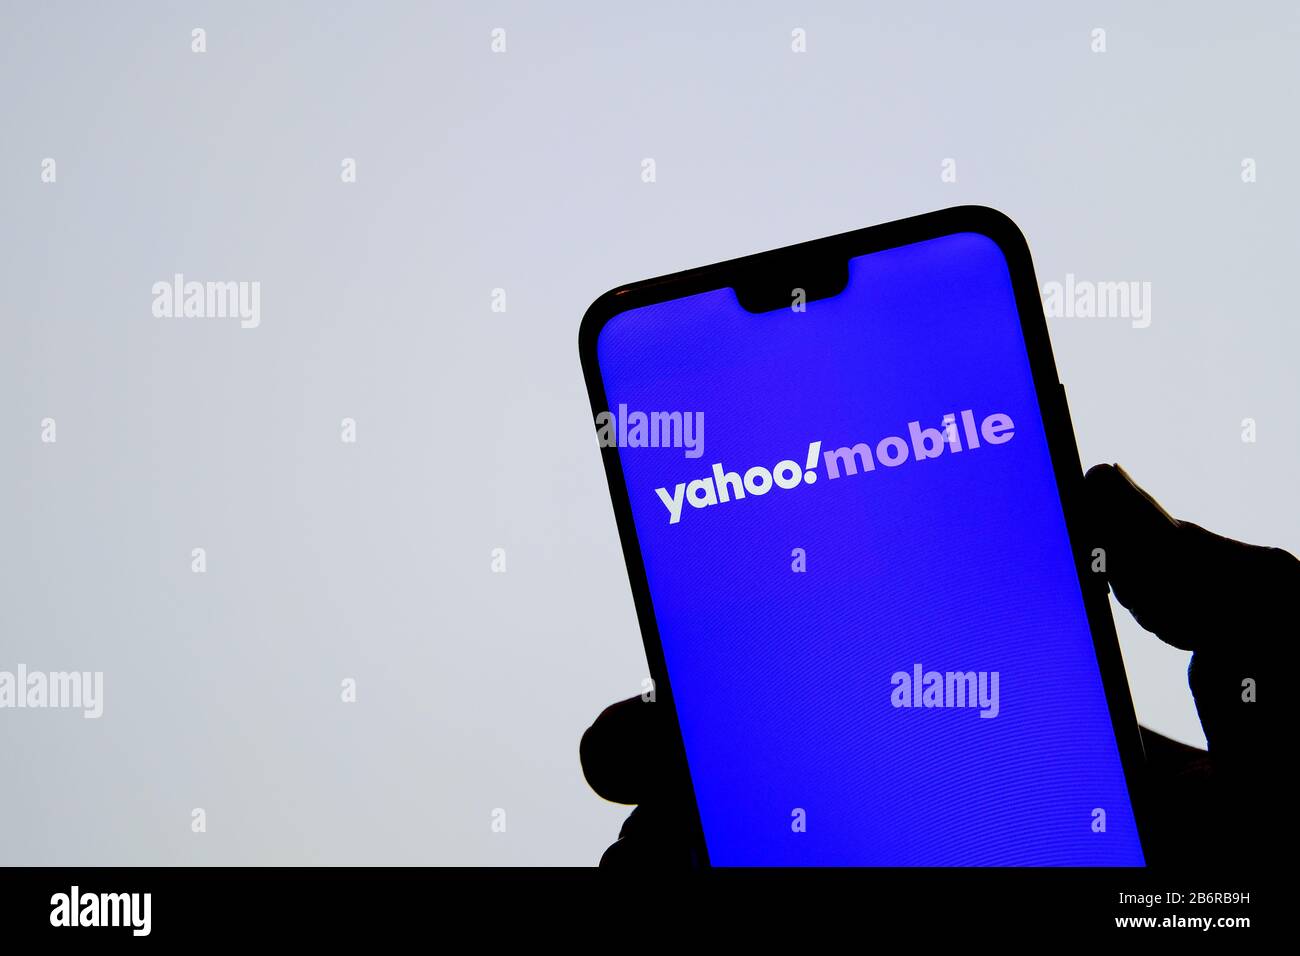 Stone / United Kingdom - March 11 2020: Yahoo! Mobile logo on the silhouette of smartphone hold in a hand and blurred white background. Stock Photo